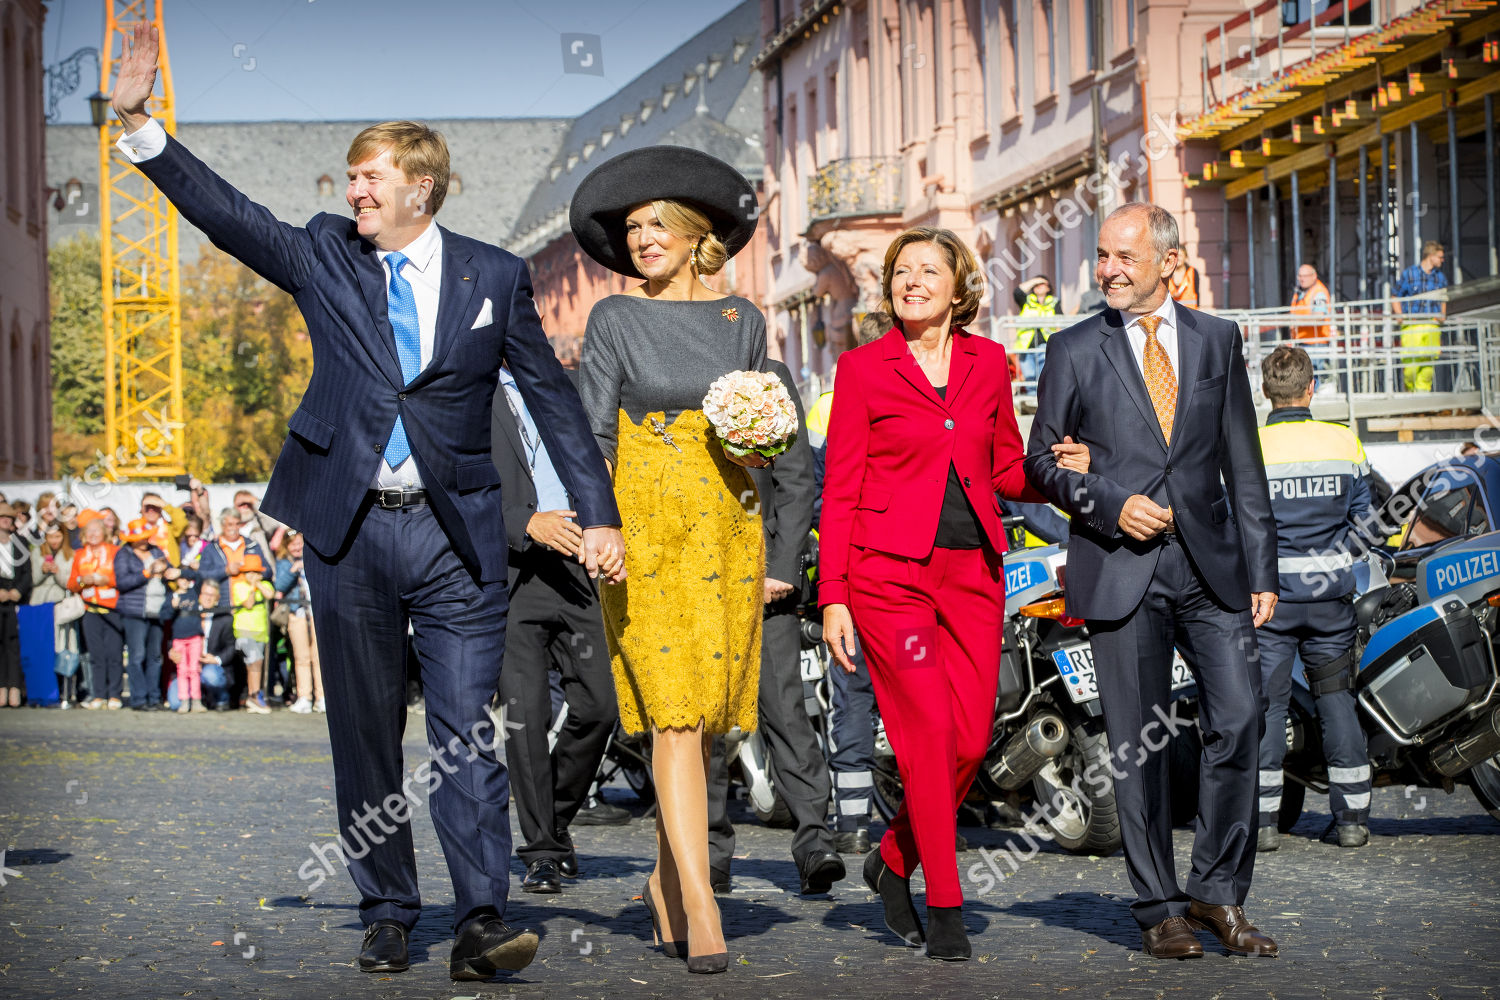 arrival-of-king-willem-alexander-and-queen-maxima-at-the-state-chancellery-of-rhineland-palatinate-mainz-germany-shutterstock-editorial-9921368l.jpg